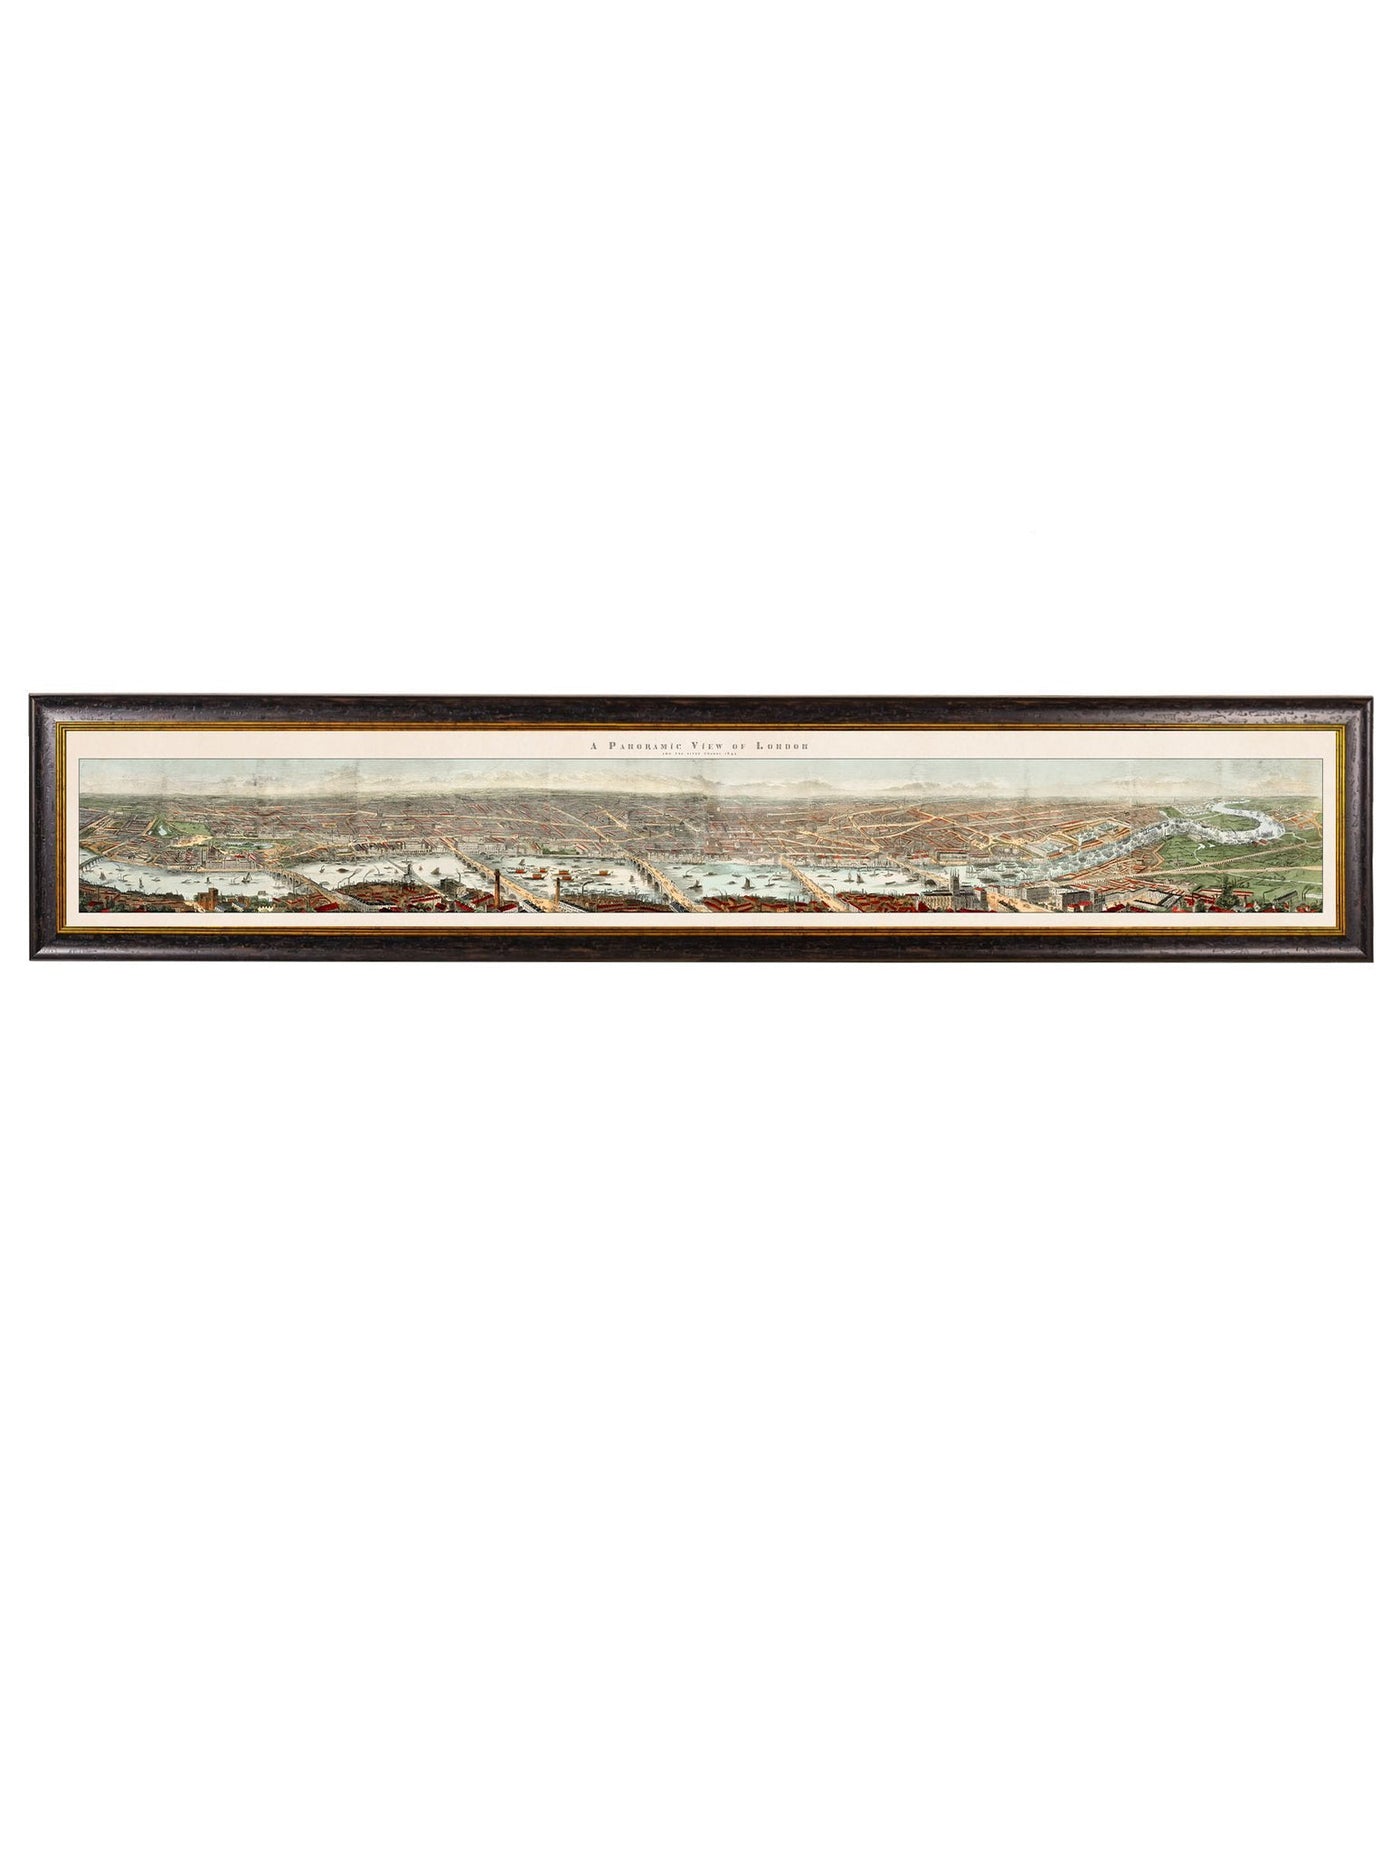 C.1845 PANORAMIC VIEW OF LONDON AND THE RIVER THAMES - TheArtistsQuarter